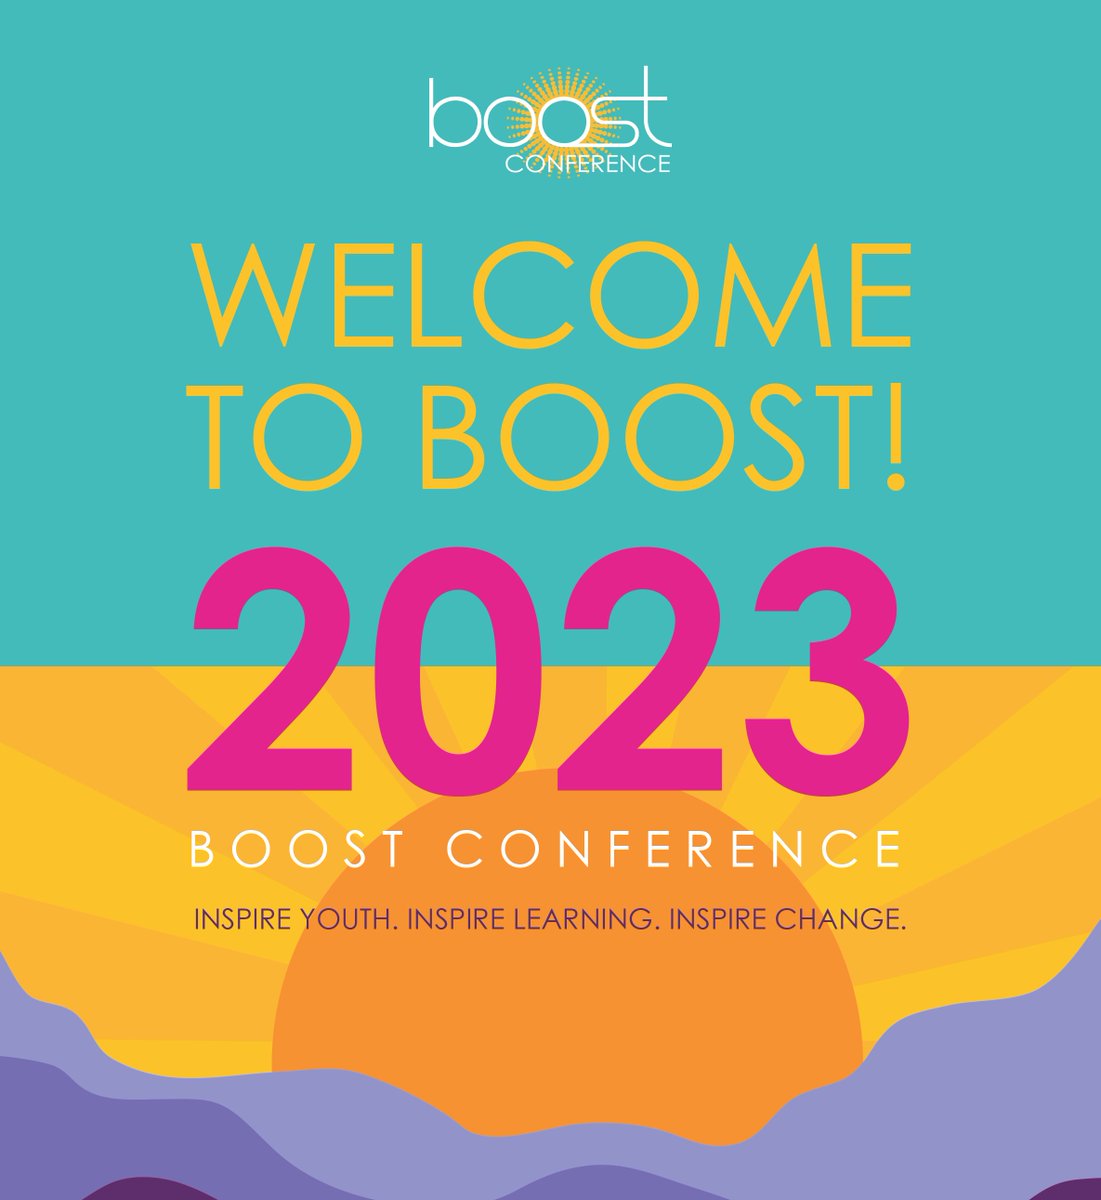 Today at #BoostConference, our Chief Engagement Officer @rachelbruns is a panelist — alongside @afterschool4all & @AKAfterschool — for a workshop on how afterschool & summer learning programs can leverage #NationalService members. @TEAMBOOST

Learn more: boostconference.org